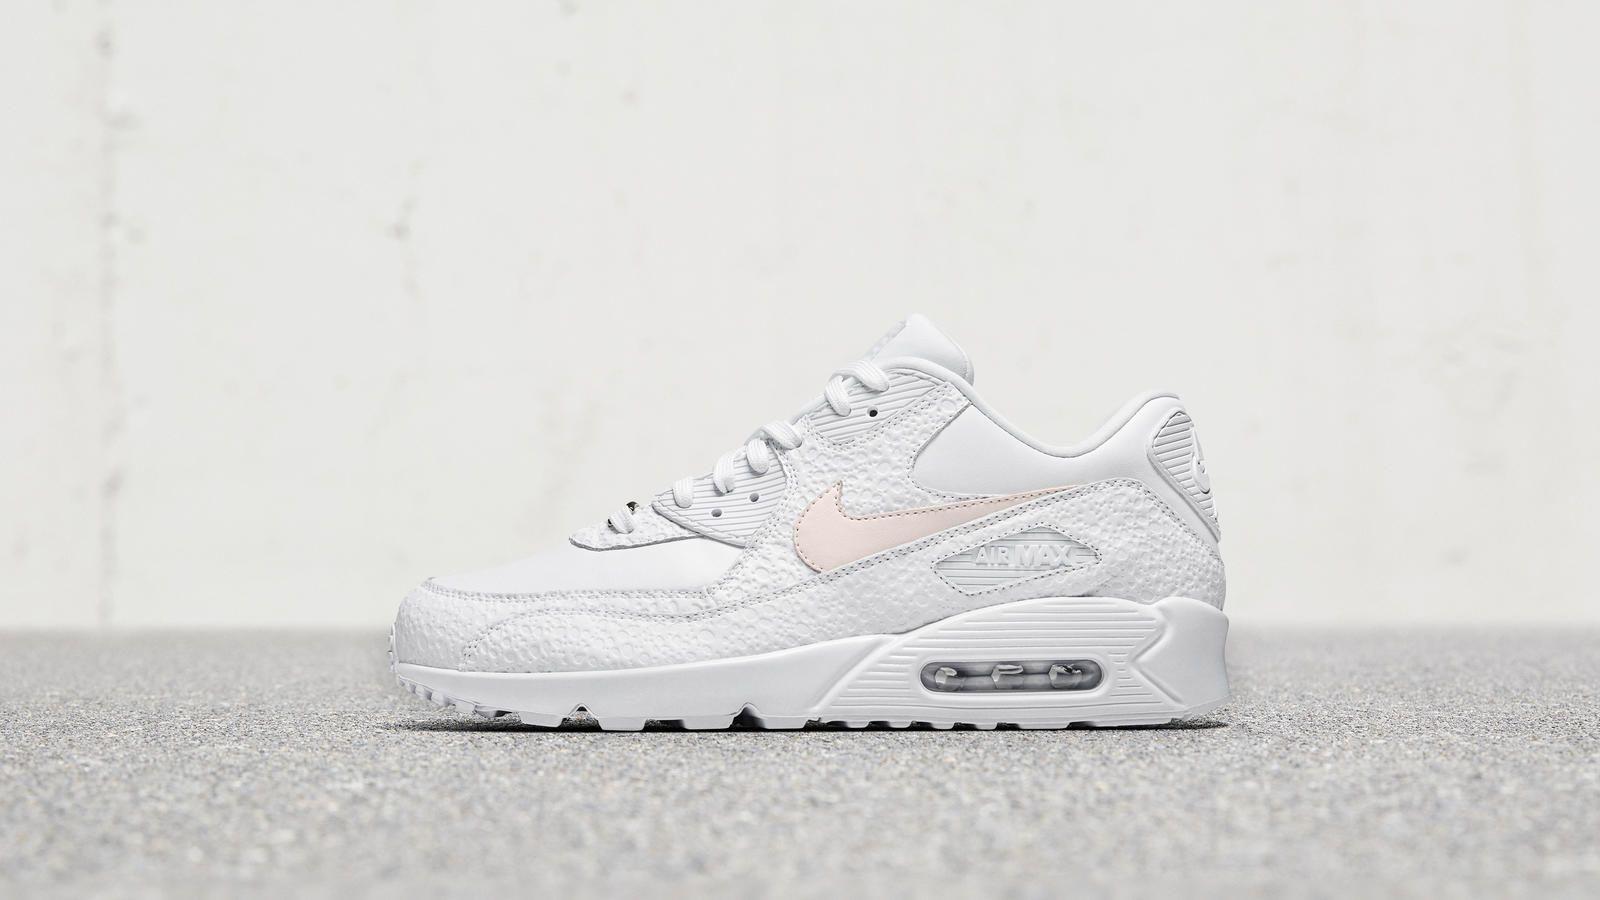 Nike Flyleather Air Max 90 SE